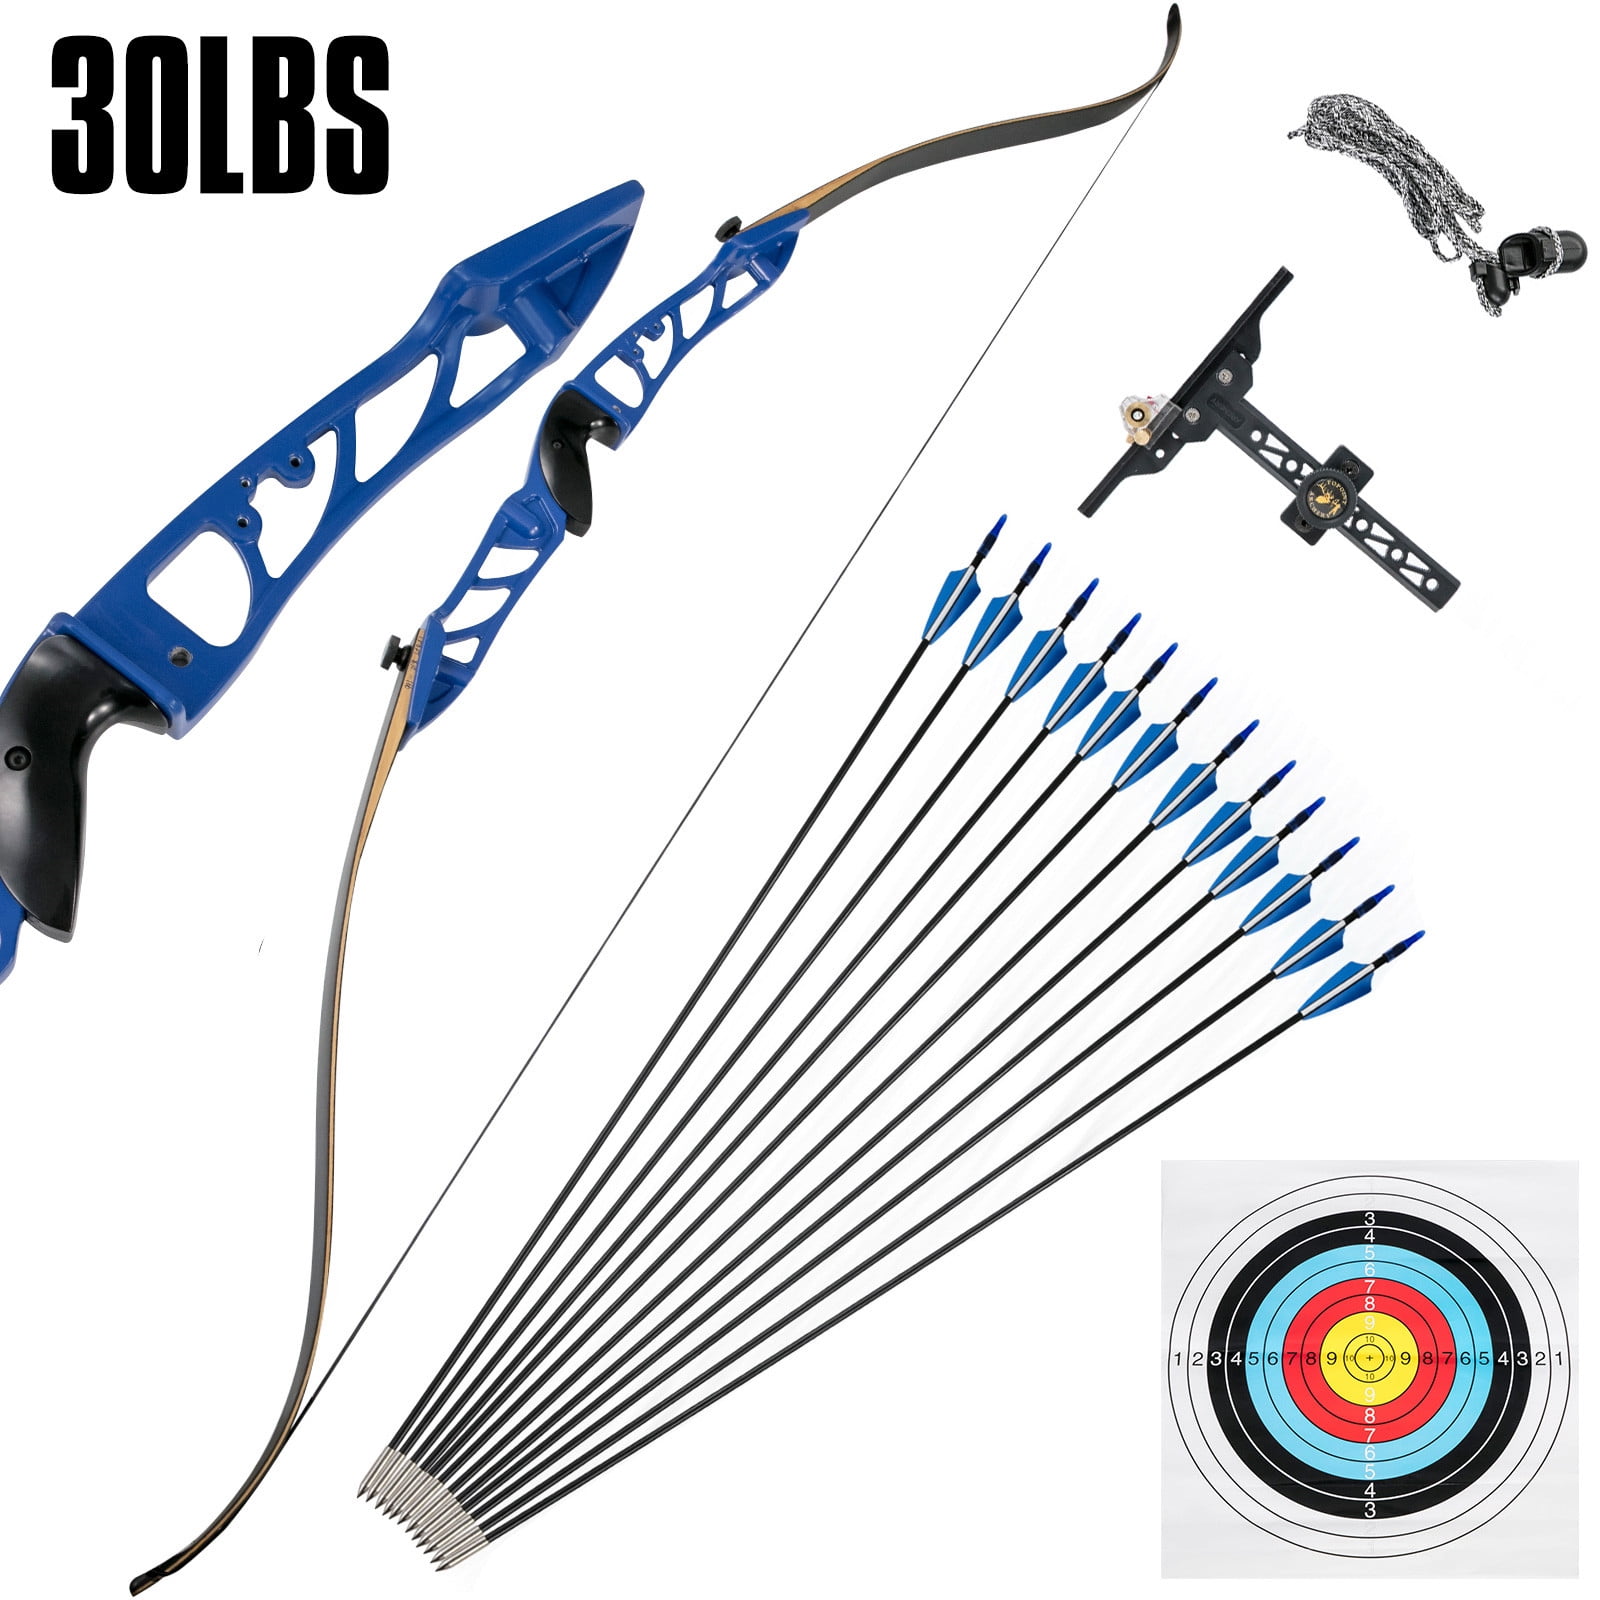 30/40lbs Archery Straight Takedown Bow Target Arrows Beginner Right Hand UK 